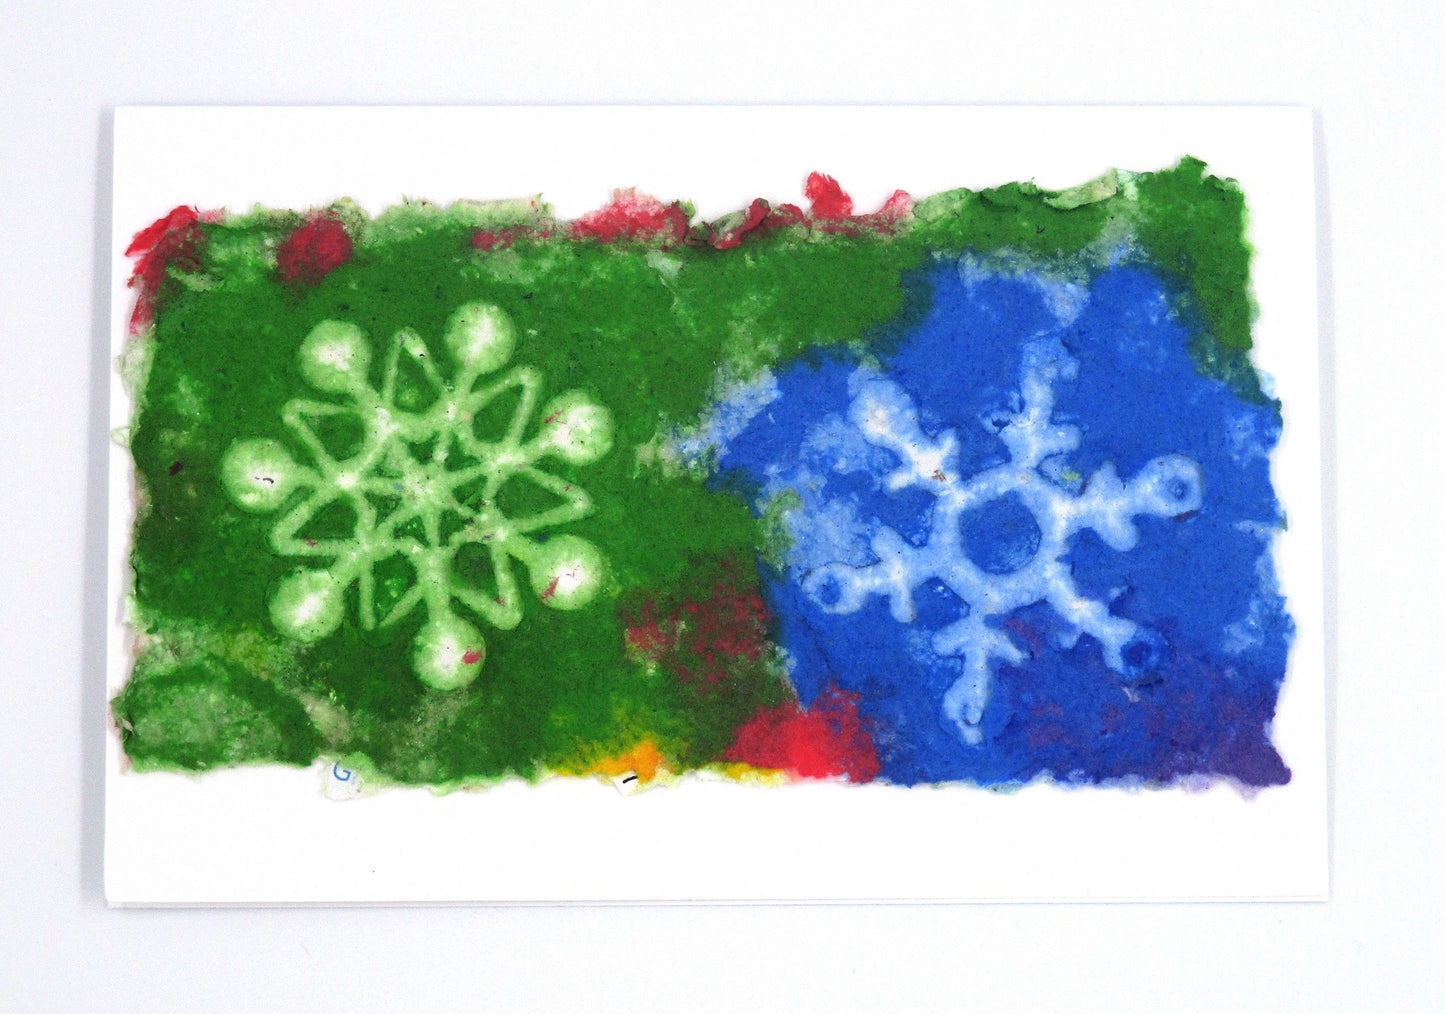 Handmade paper greeting card with green and blue background with two white snowflakes